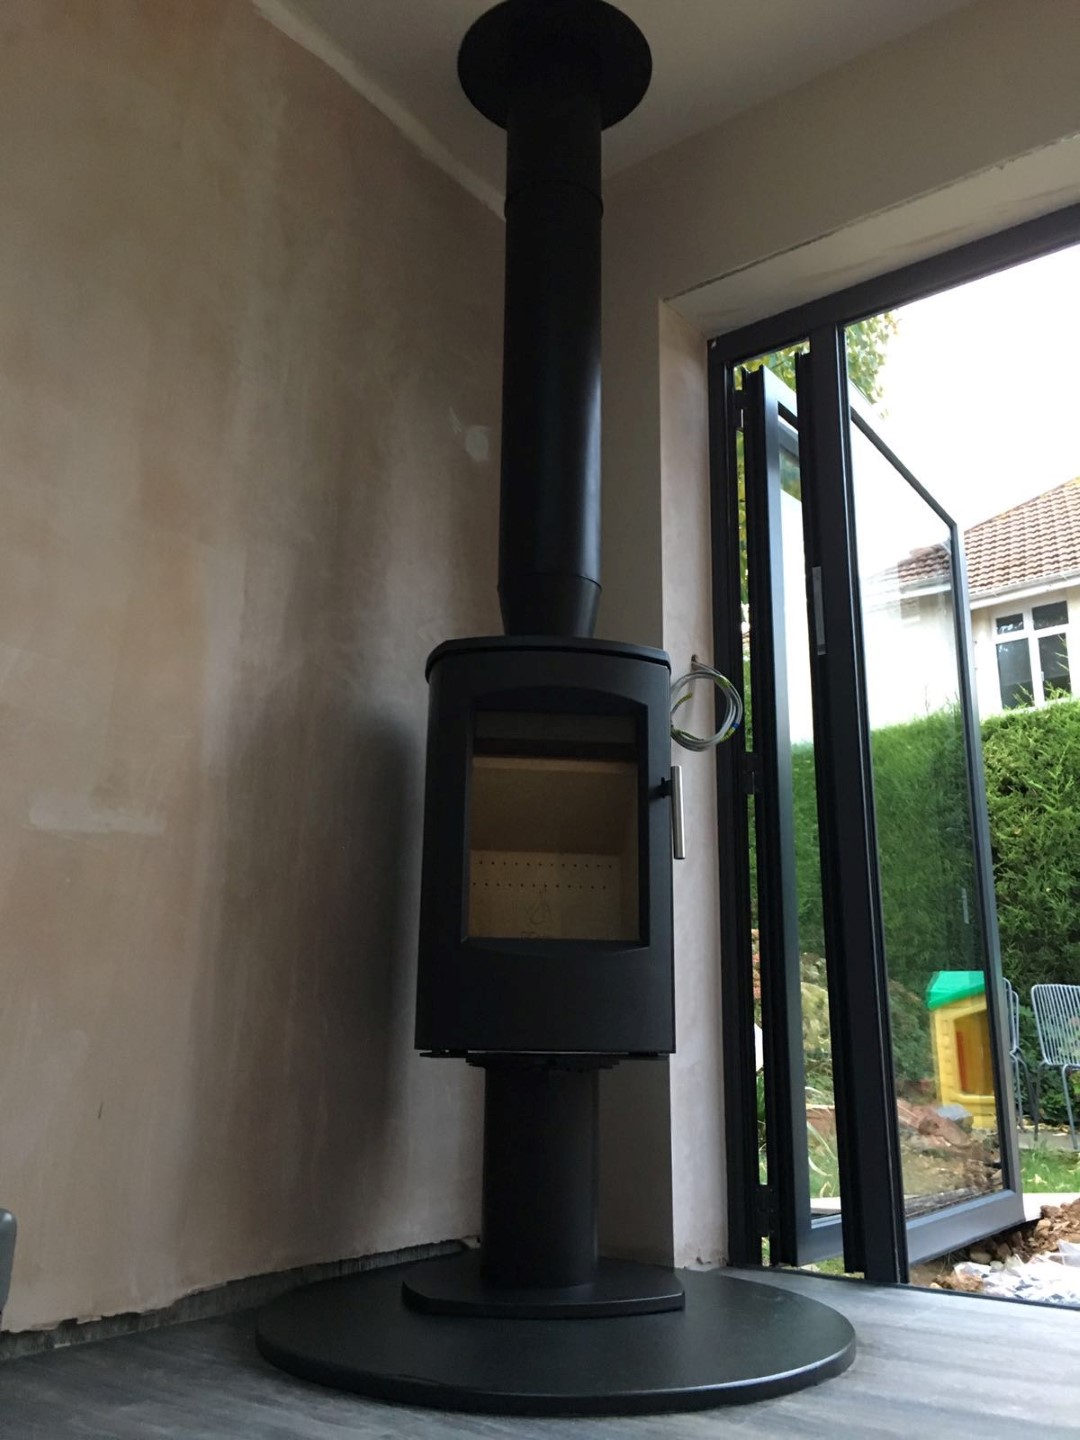 Embers Bristol stove installation in an extension